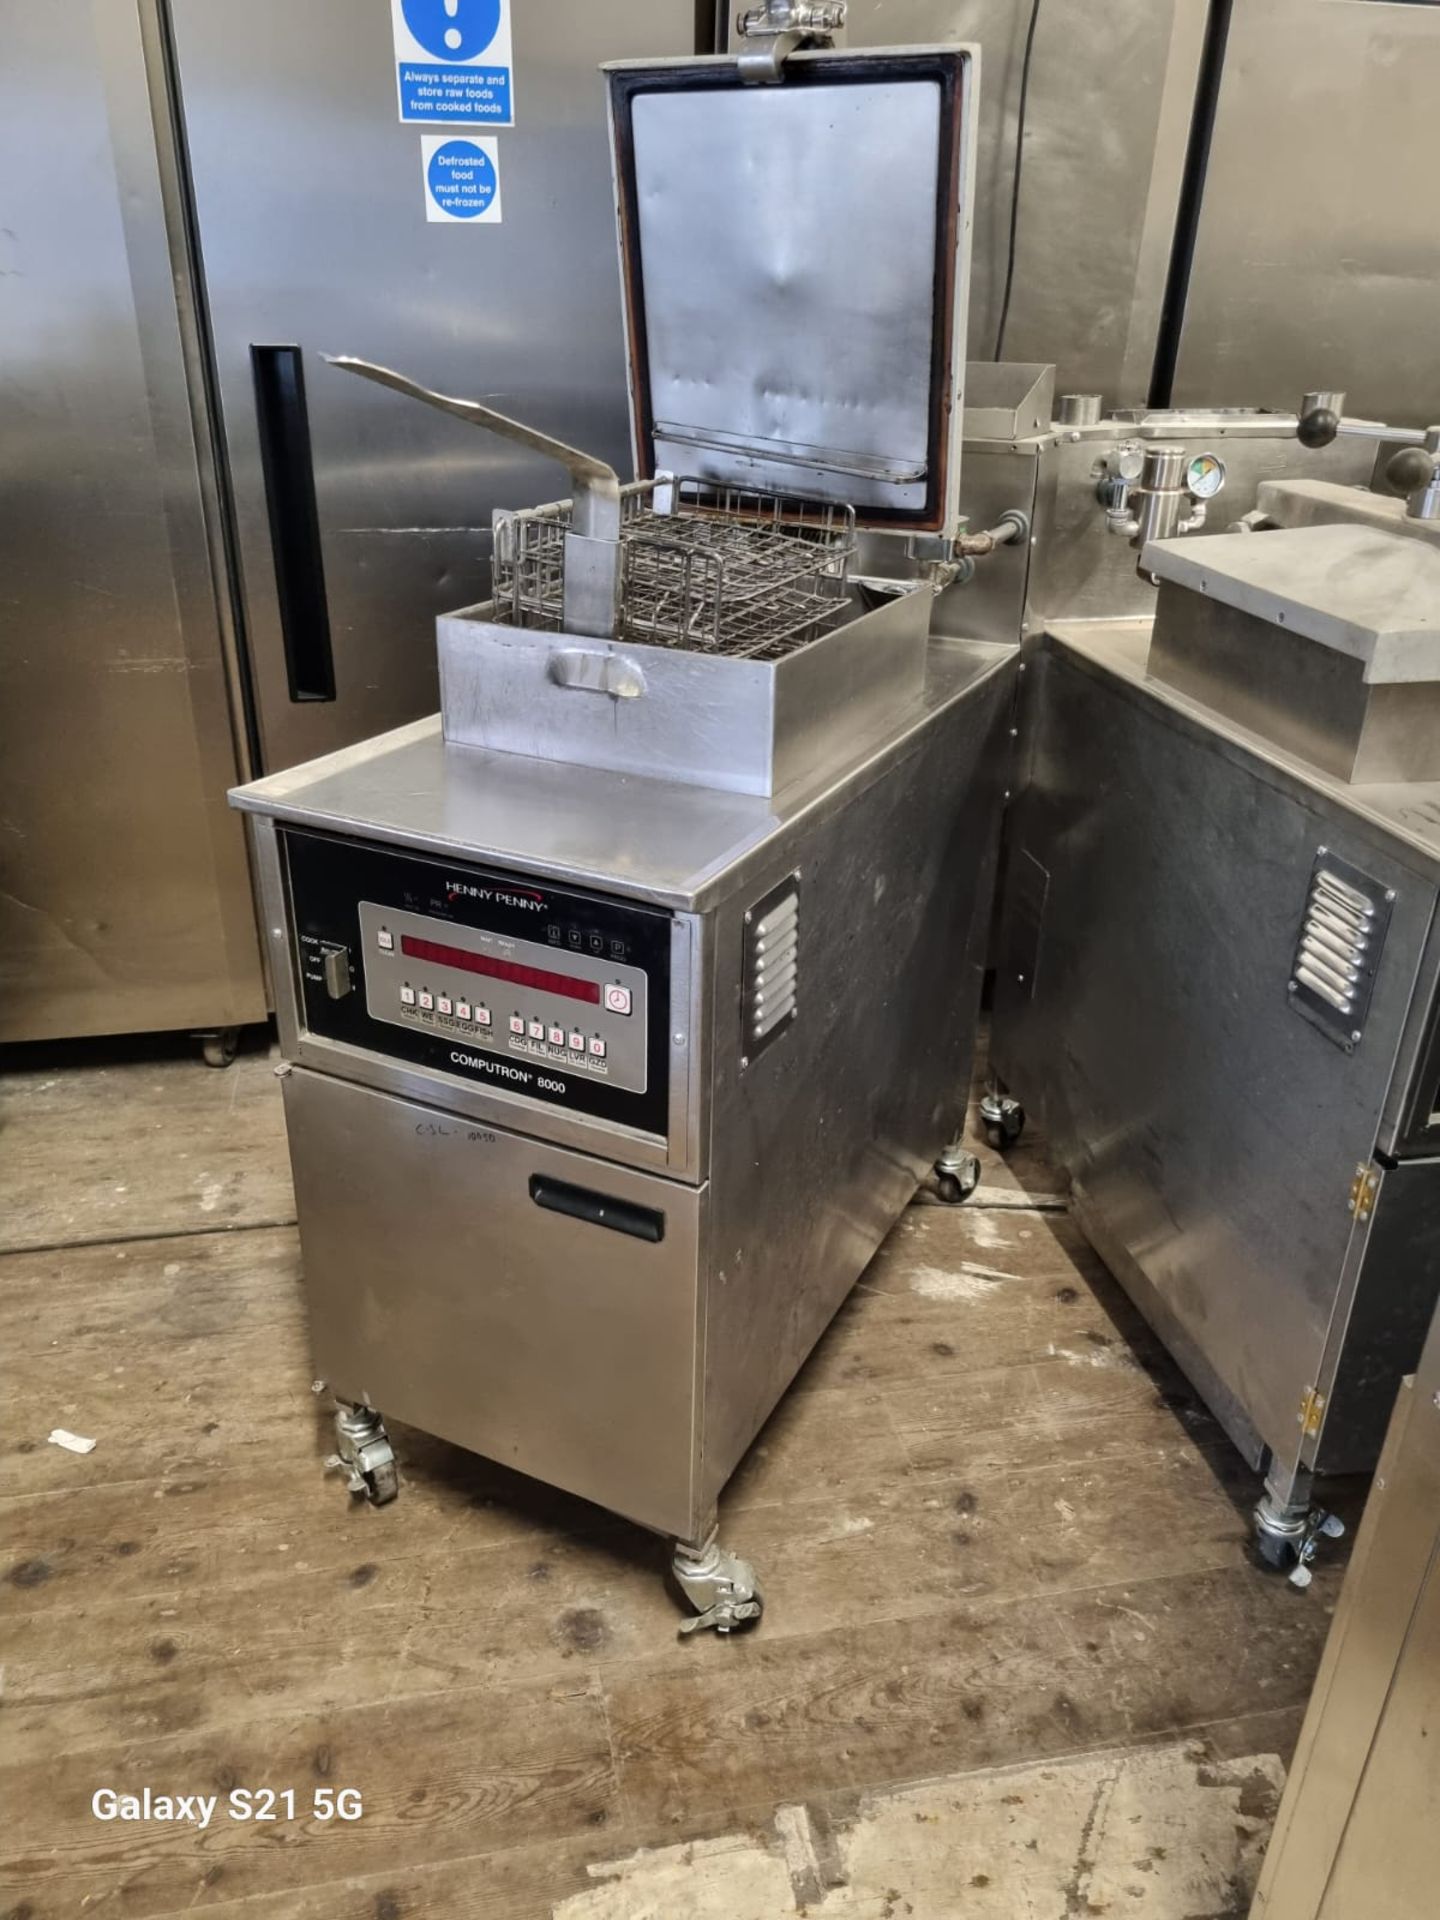 HENNY PENNY COMPUTEON 8000 GAS PRESSURE FRYER - FULLY SERVICED AND TESTED - ALL ORIGINAL PARTS 